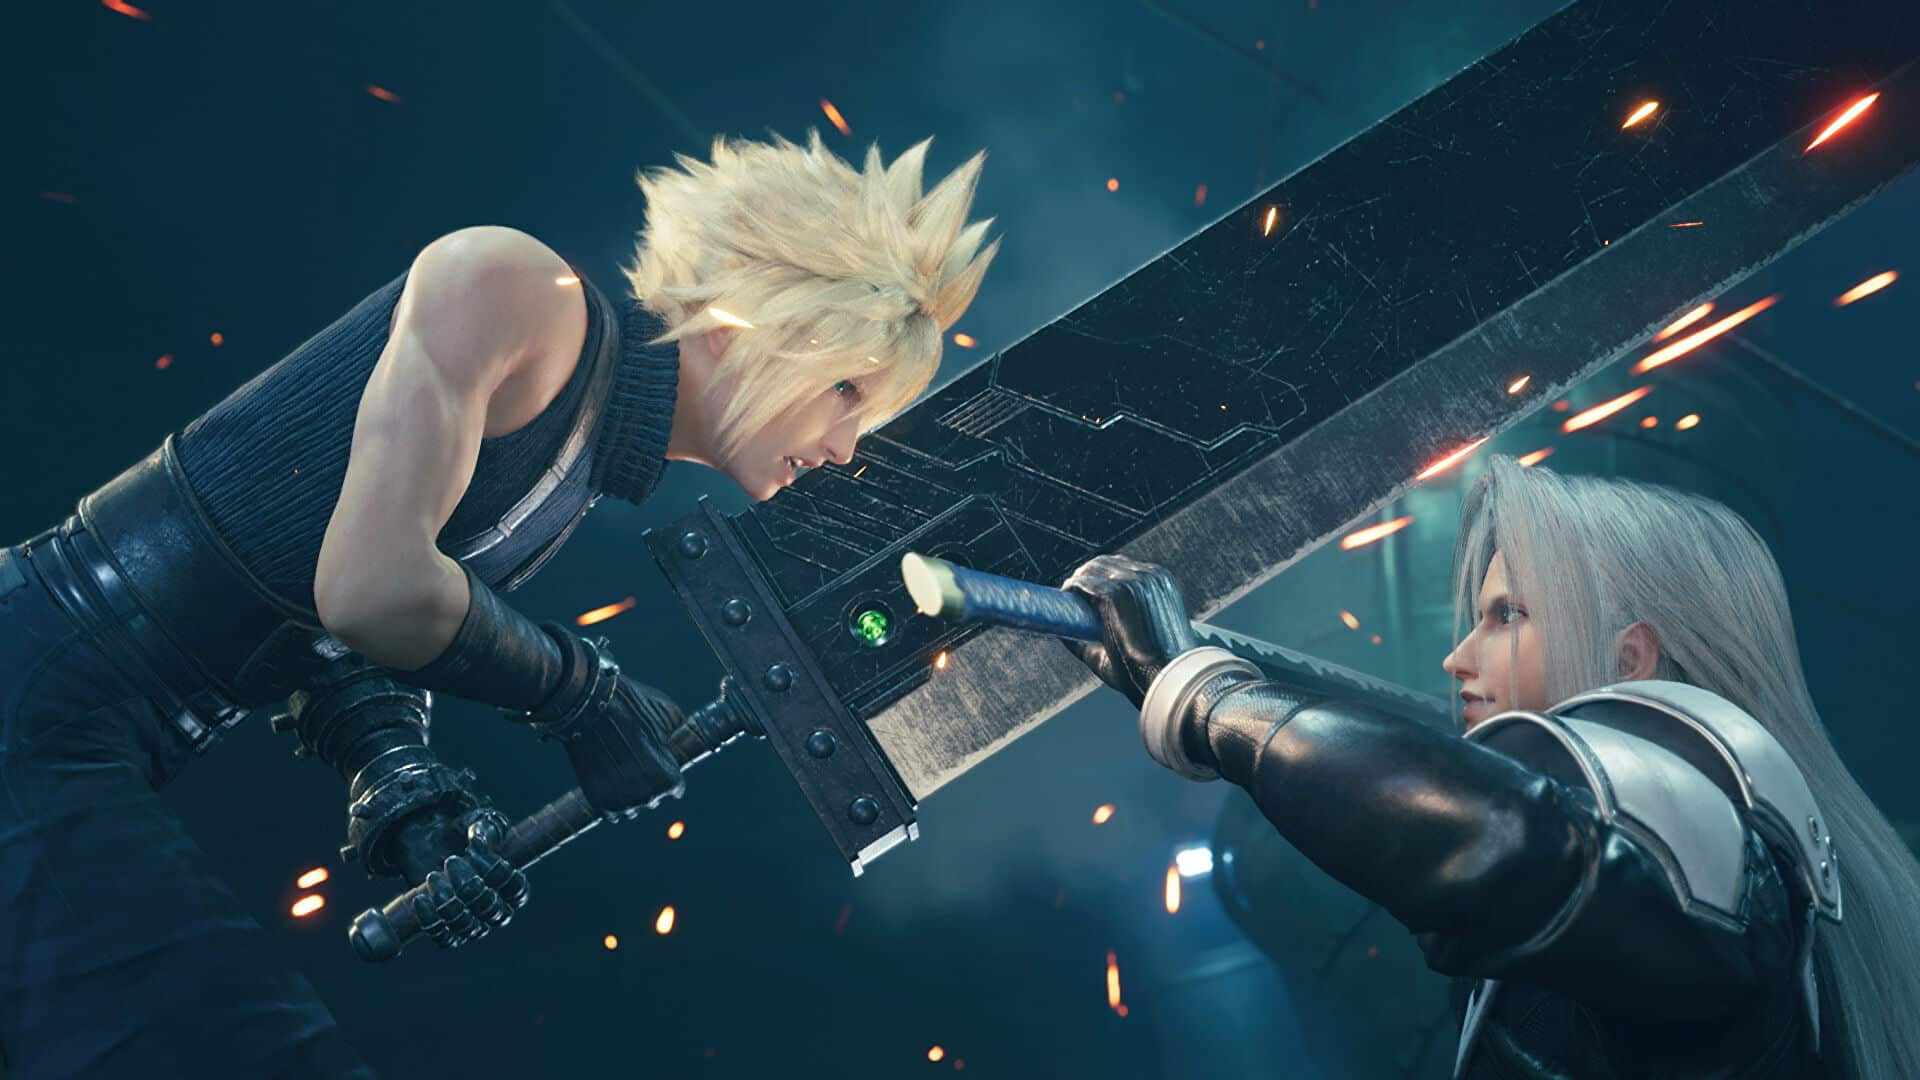 Sephiroth and Cloud clash in a screen grab from Square Enix's FF7